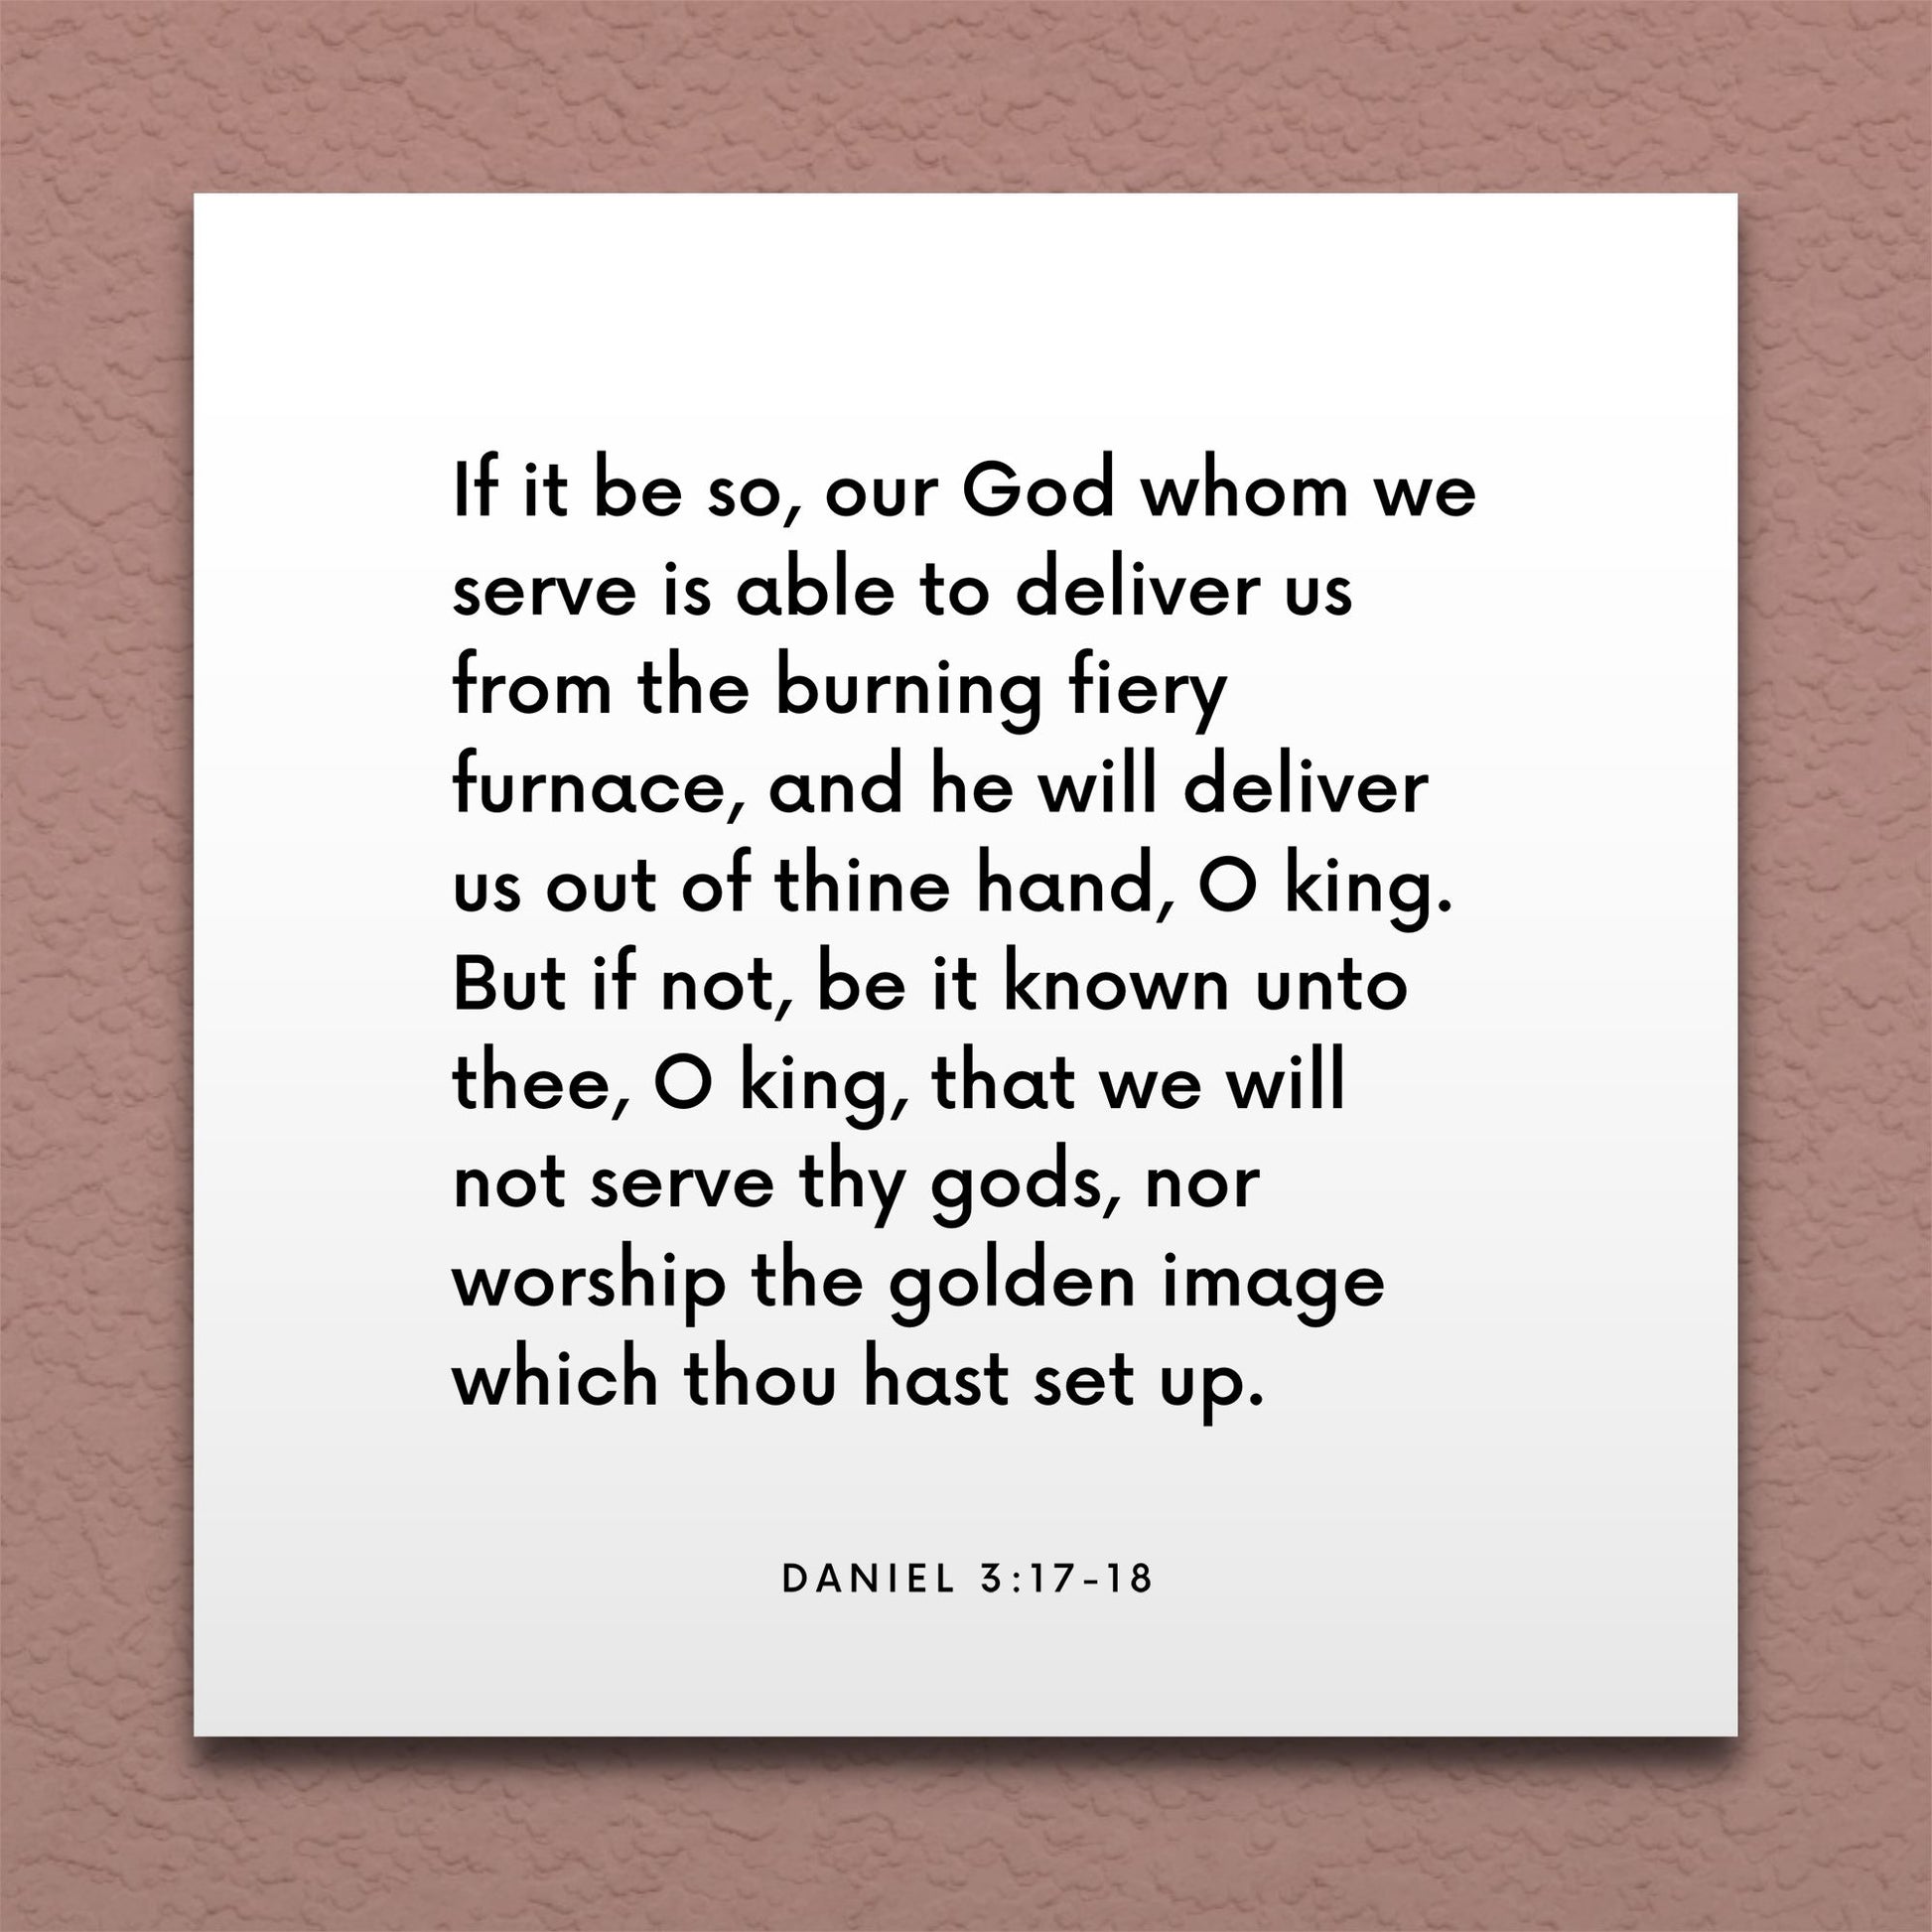 Wall-mounted scripture tile for Daniel 3:17-18 - "Our God is able to deliver us from the burning fiery furnace"